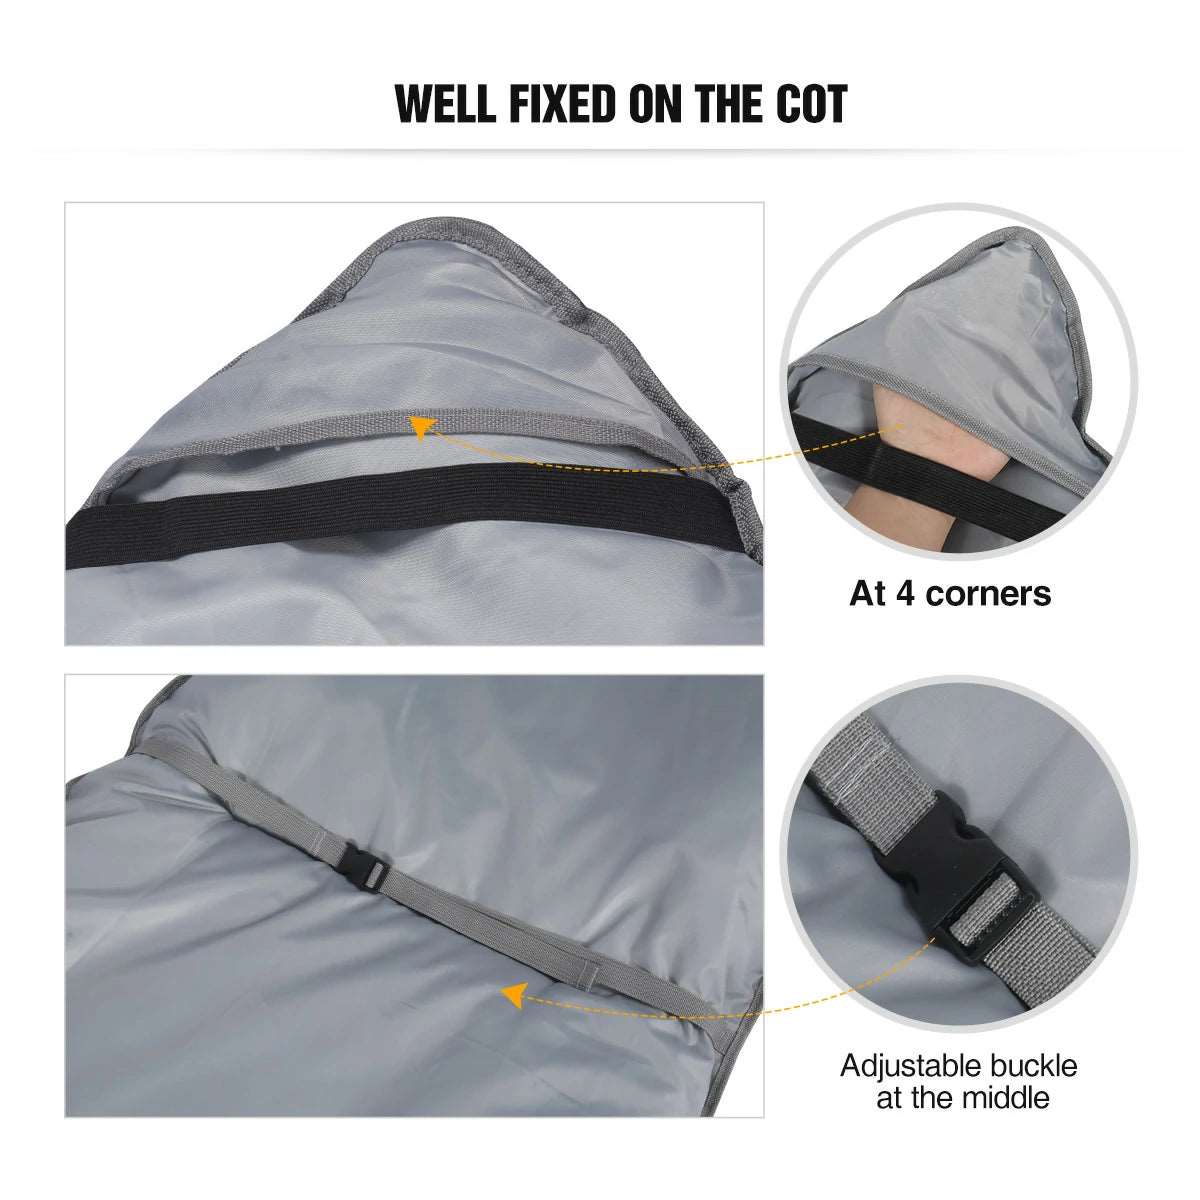 Sleeping Cot Pads for Camping